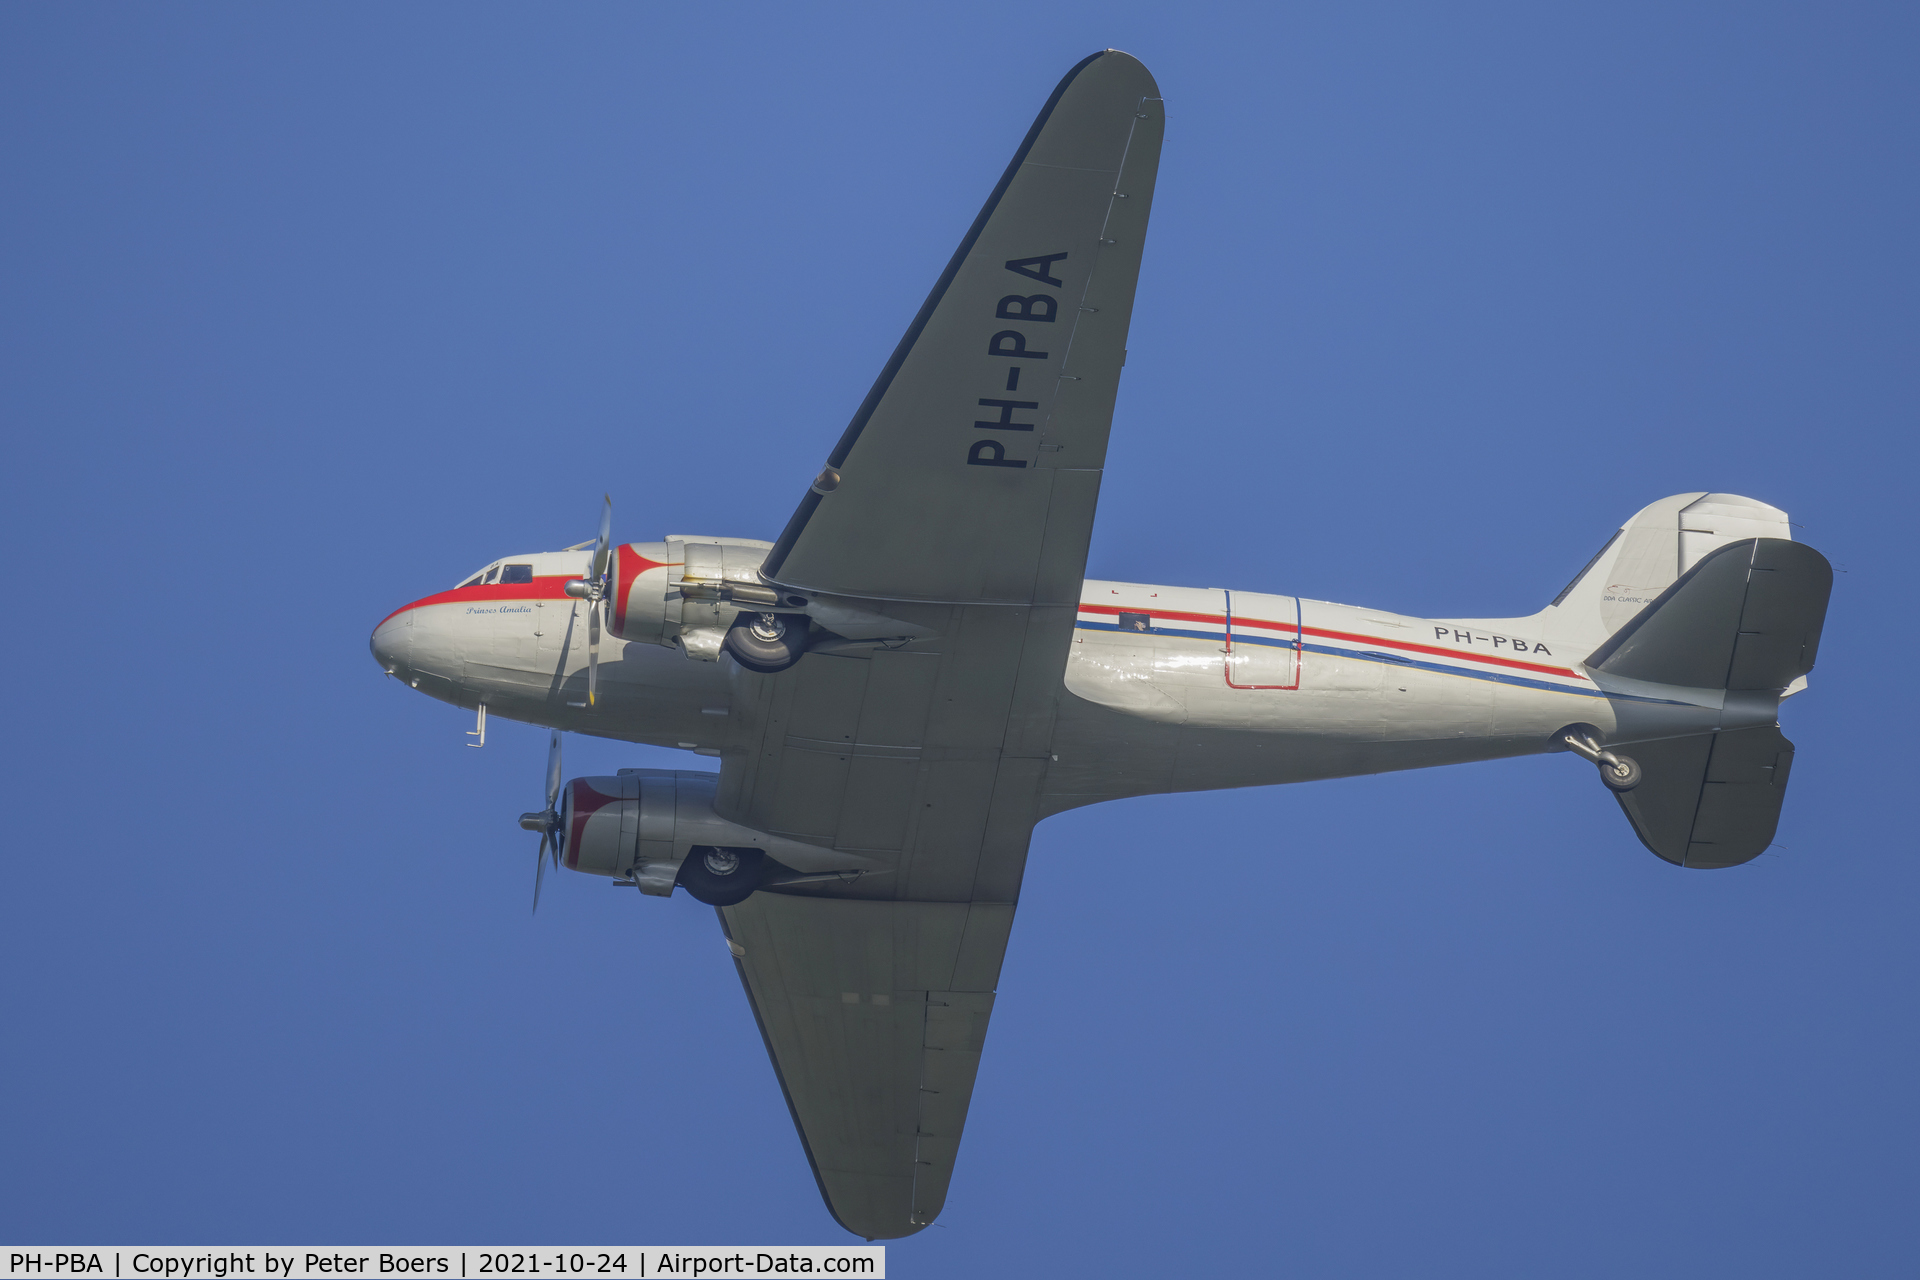 PH-PBA, 1943 Douglas DC-3C-S1C3G (C-47A-75-DL) C/N 19434, Photo taken near Rotterdam The Hague Airport (see exif) while taking pictures of birds.